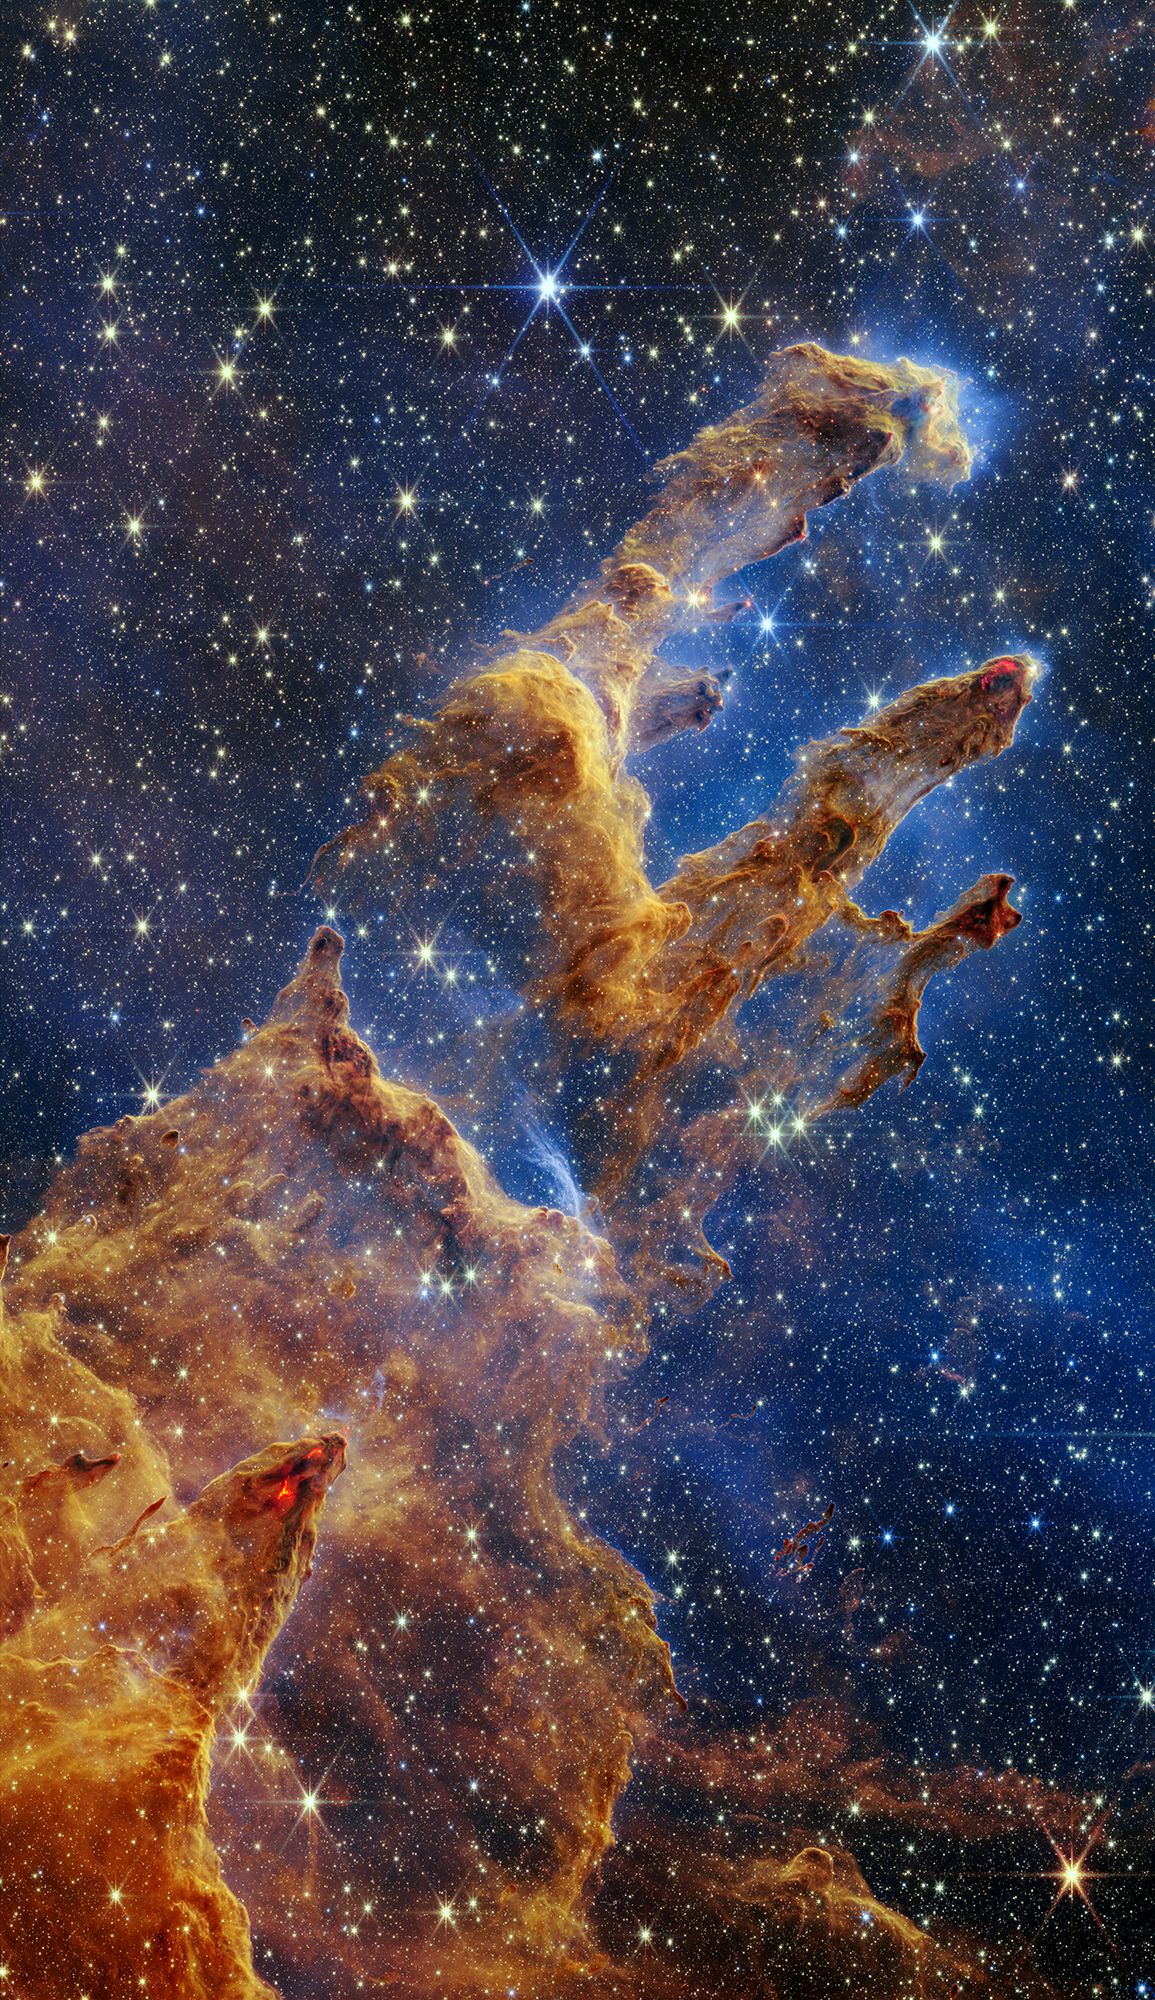 A Close Up Picture of Pillars of Creation